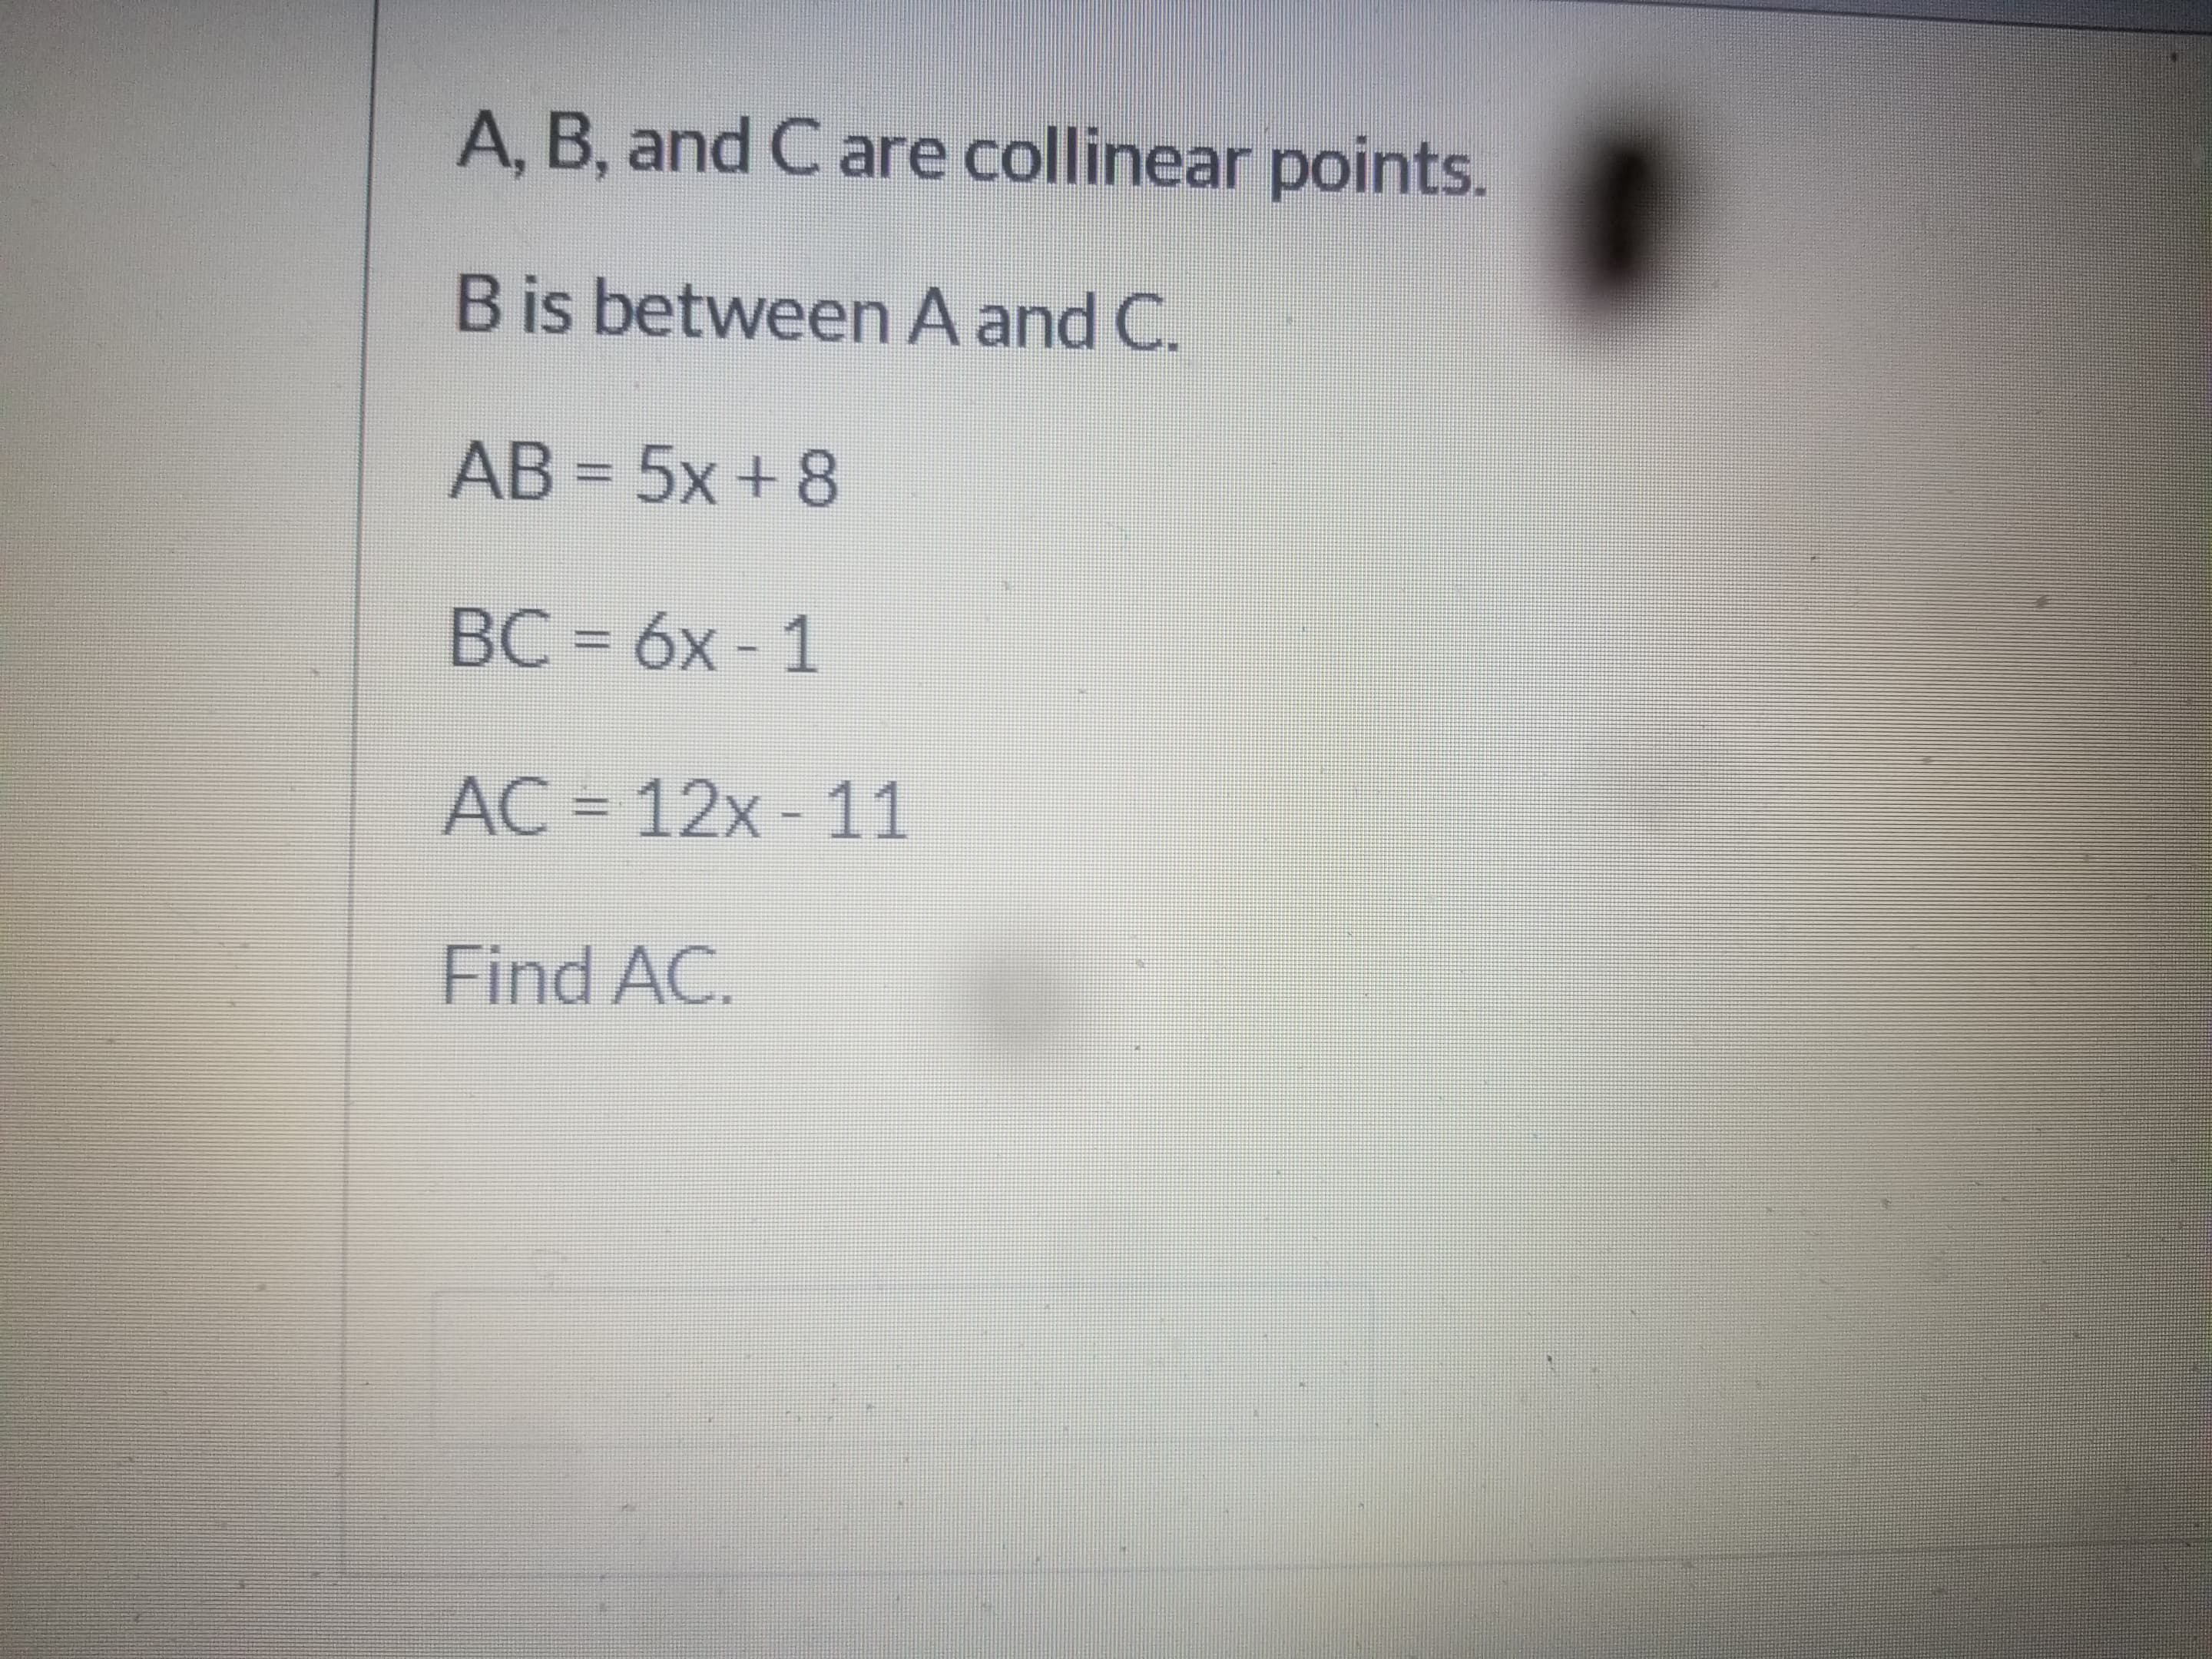 A, B, and C are collinear points.
Bis between A and C.
AB = 5x + 8
BC = 6x - 1
%3D
AC = 12x - 11
Find AC.
